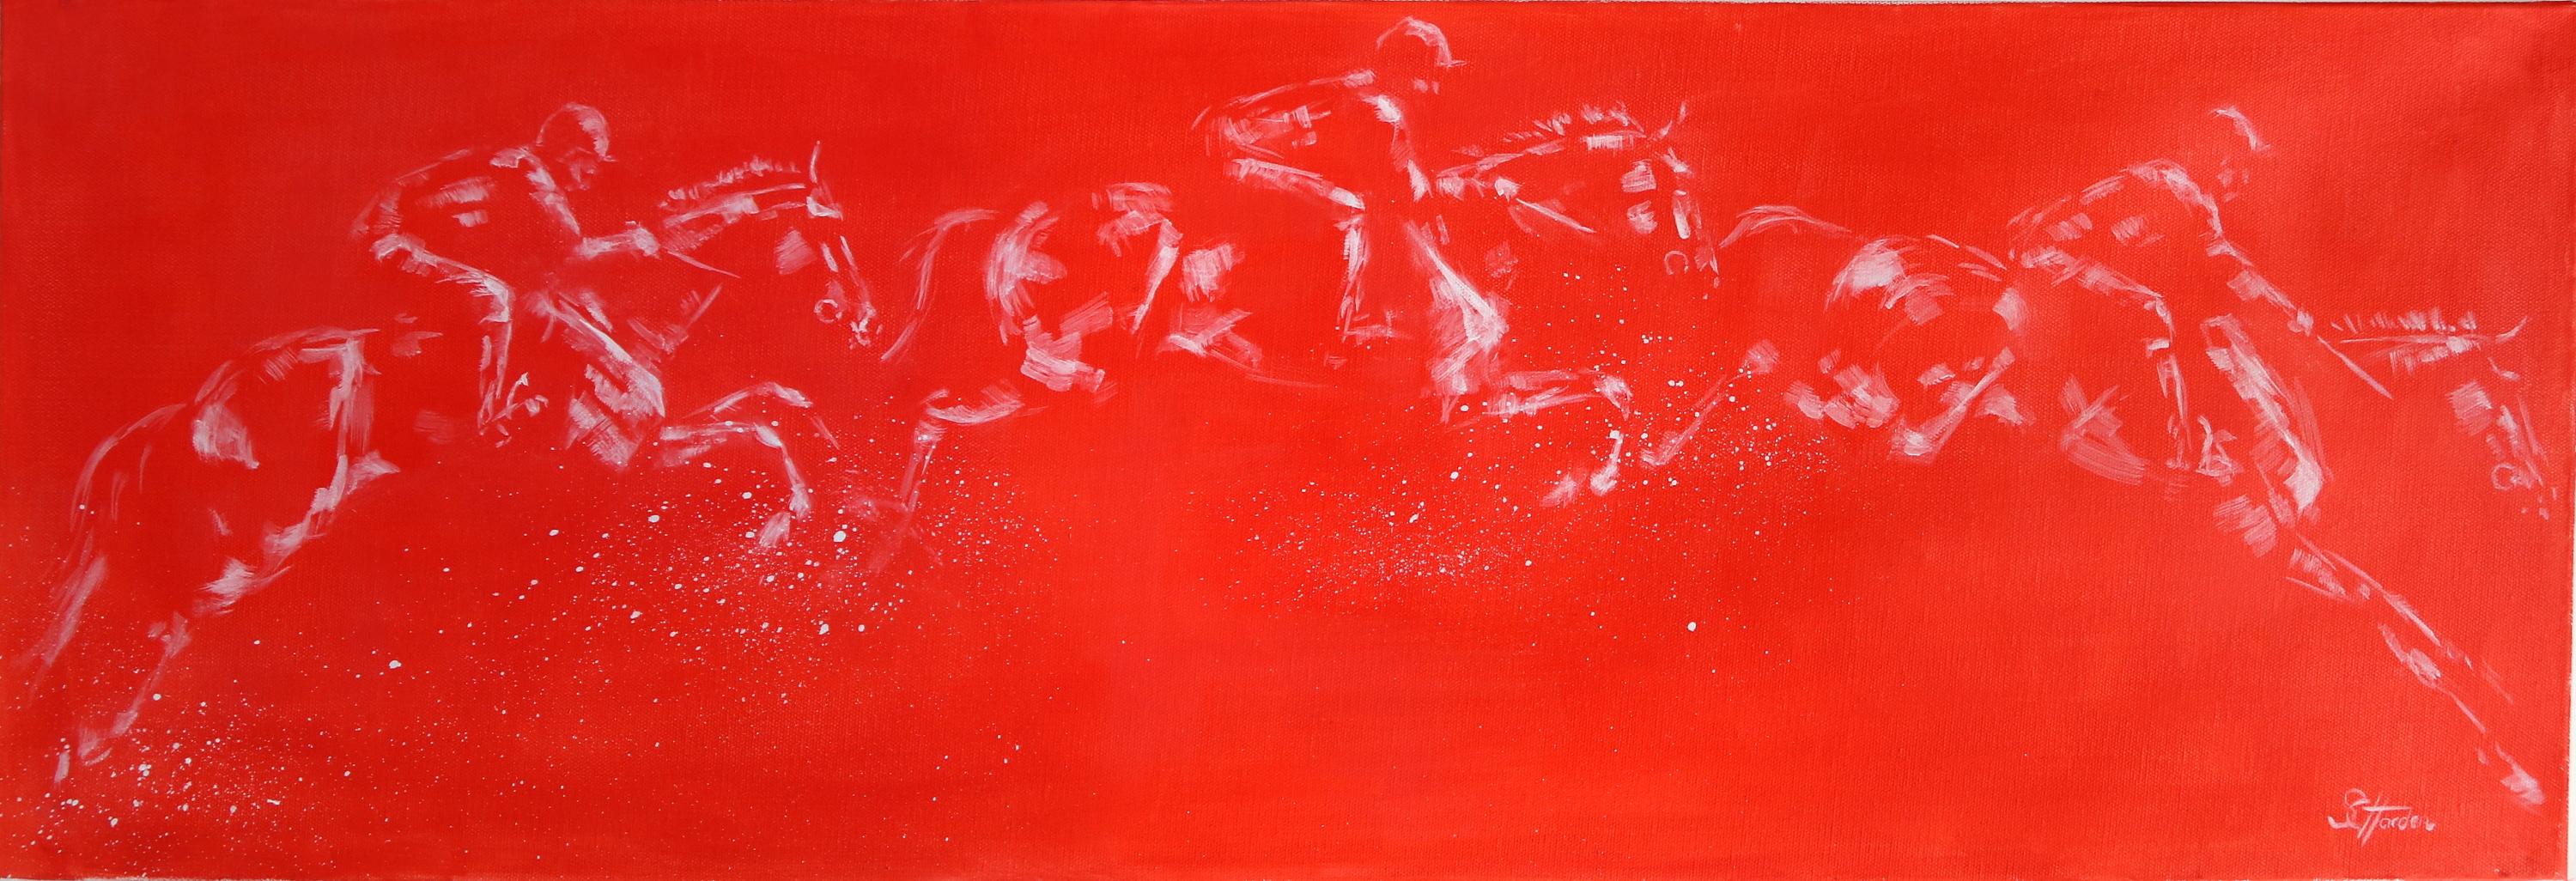 Sophie Harden Animal Painting - Schooling, Original Red Painting of Horse Riders